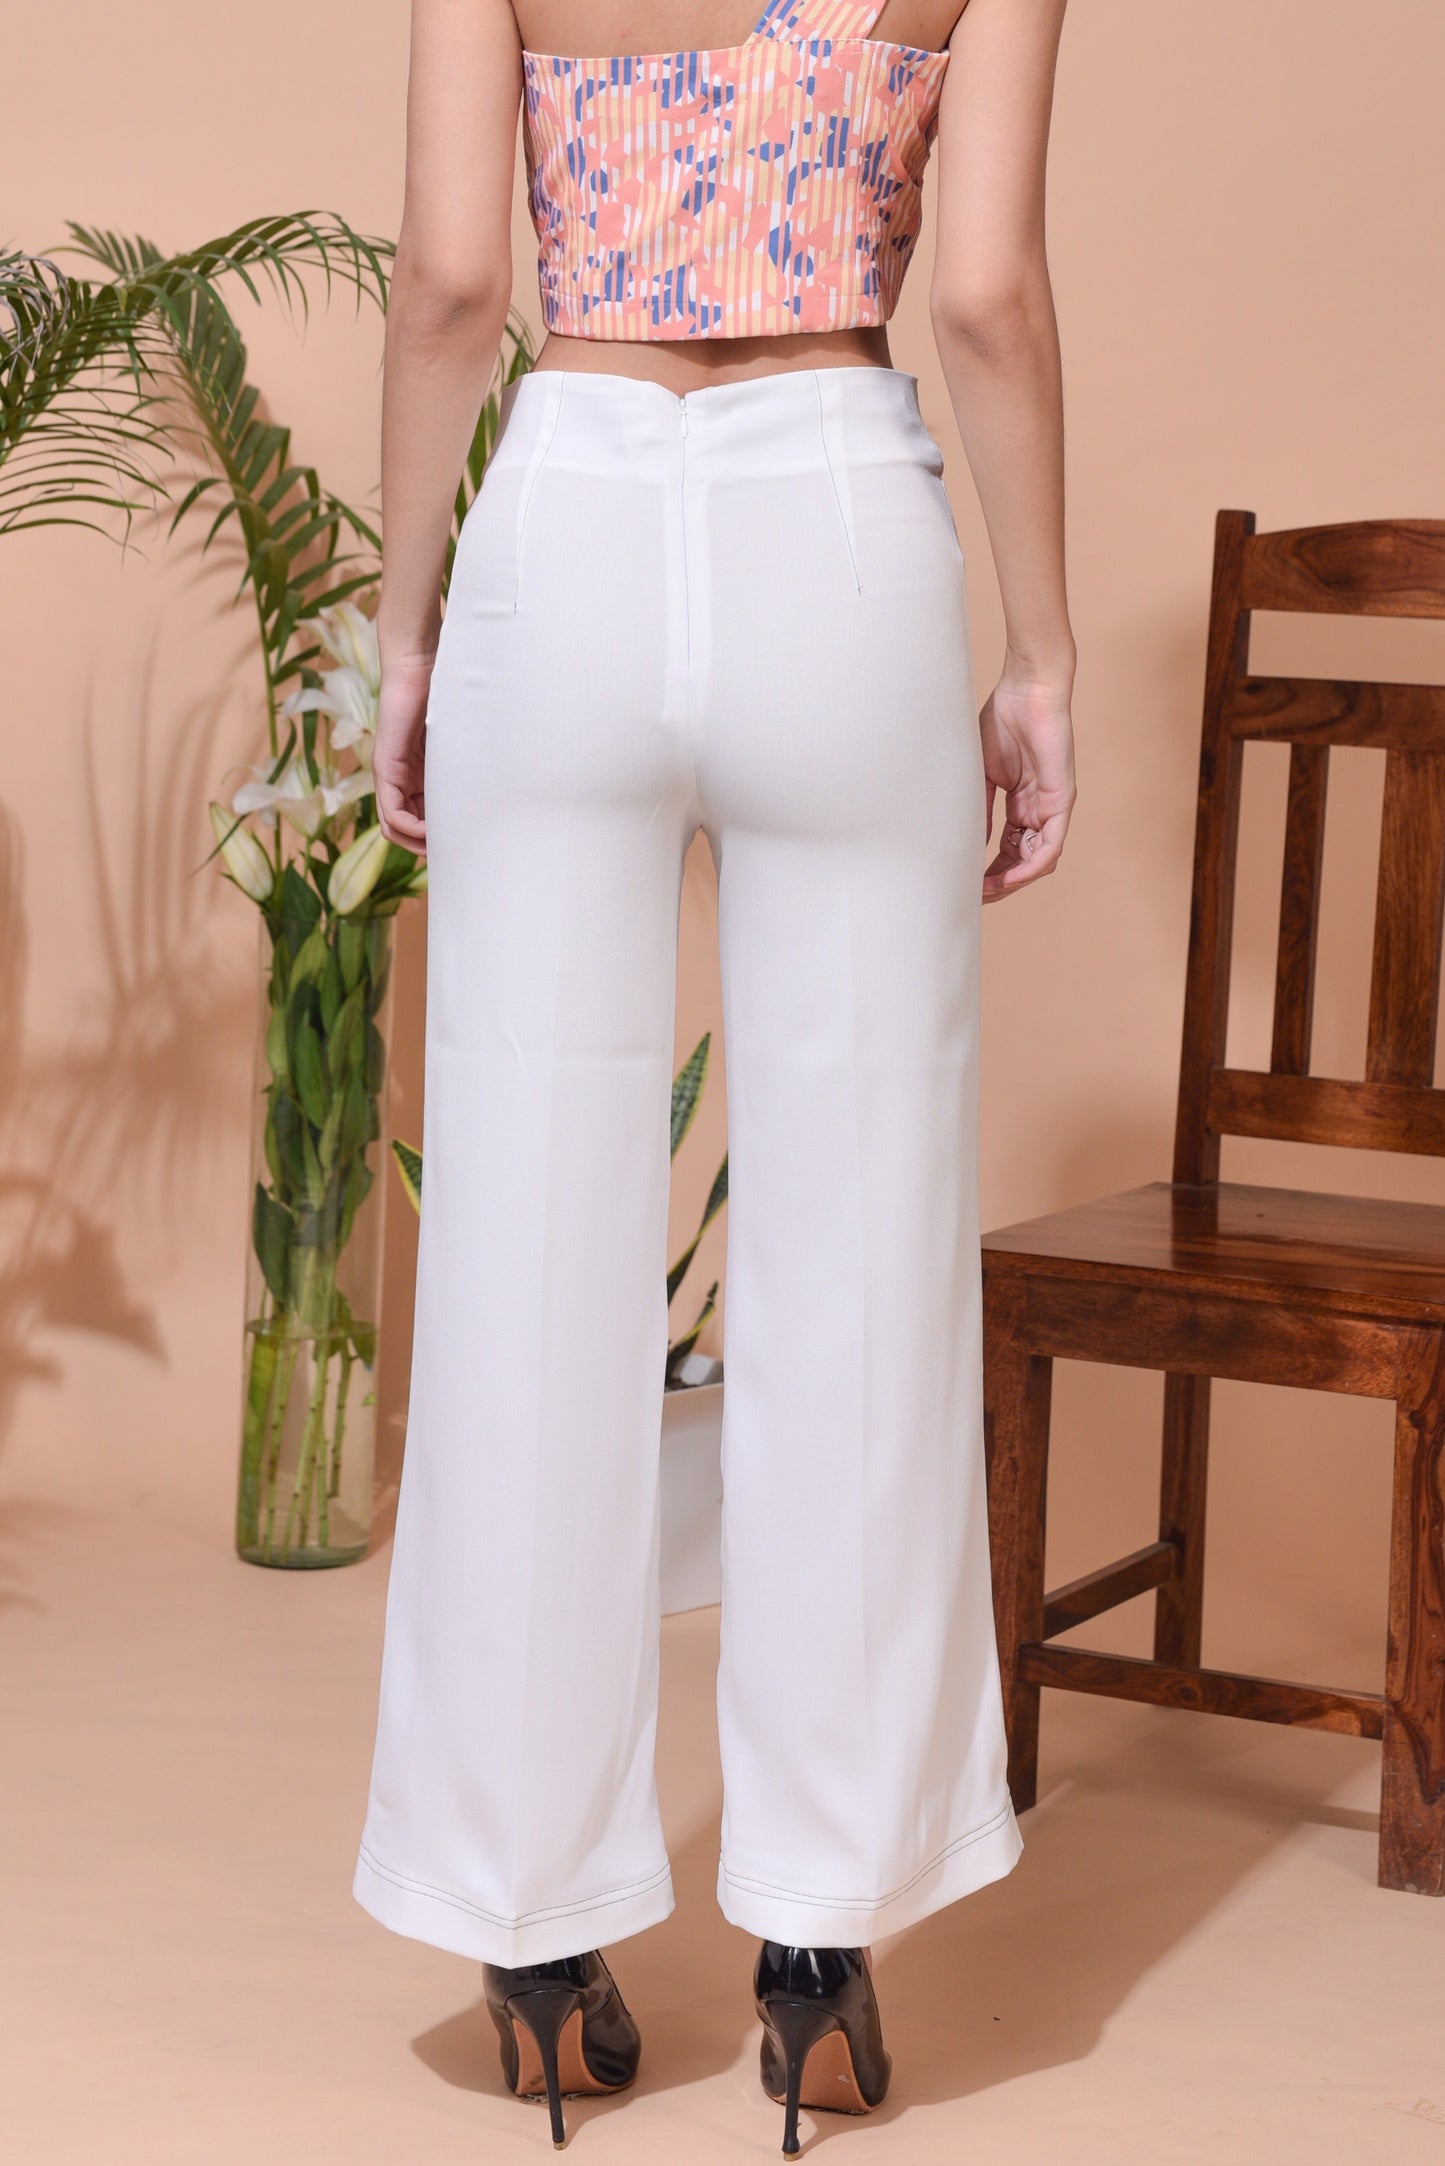 Kat White Crepe Pants with contrast Top Stitching Pants